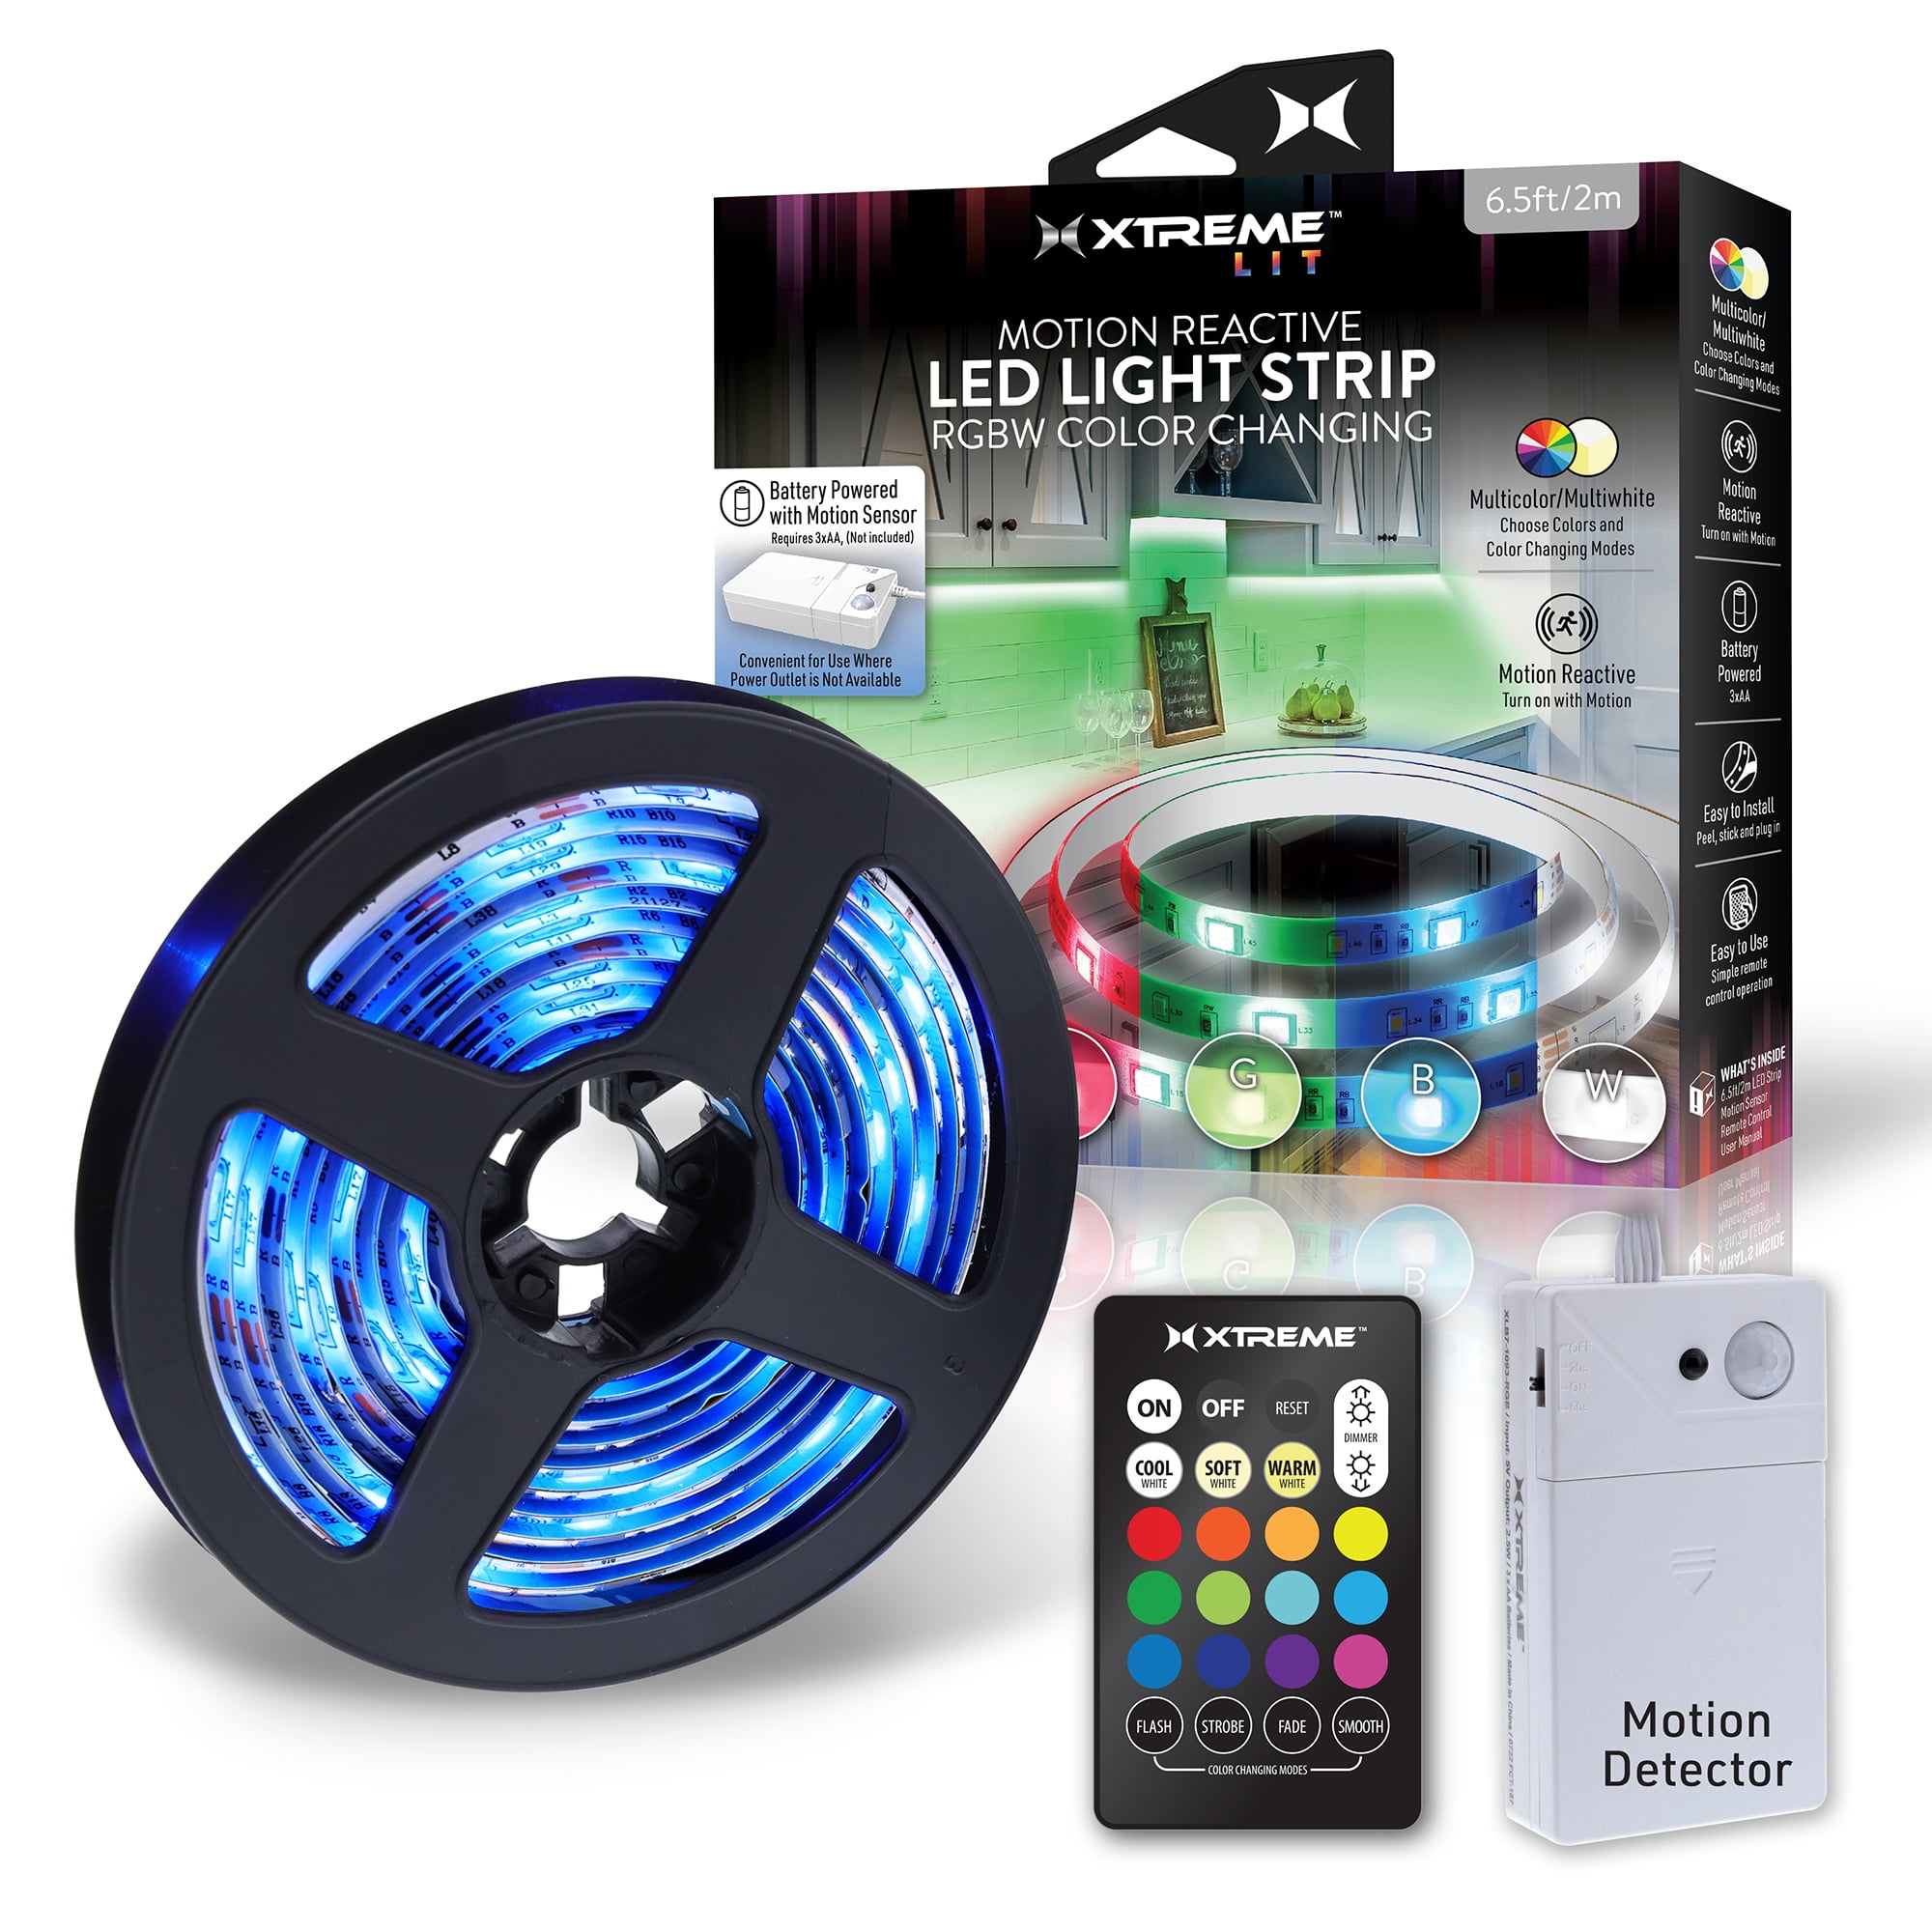 Xtreme Lit 6.5ft Indoor Motion Activated RGBW Color-Changing LED Light Strip, Battery Powered